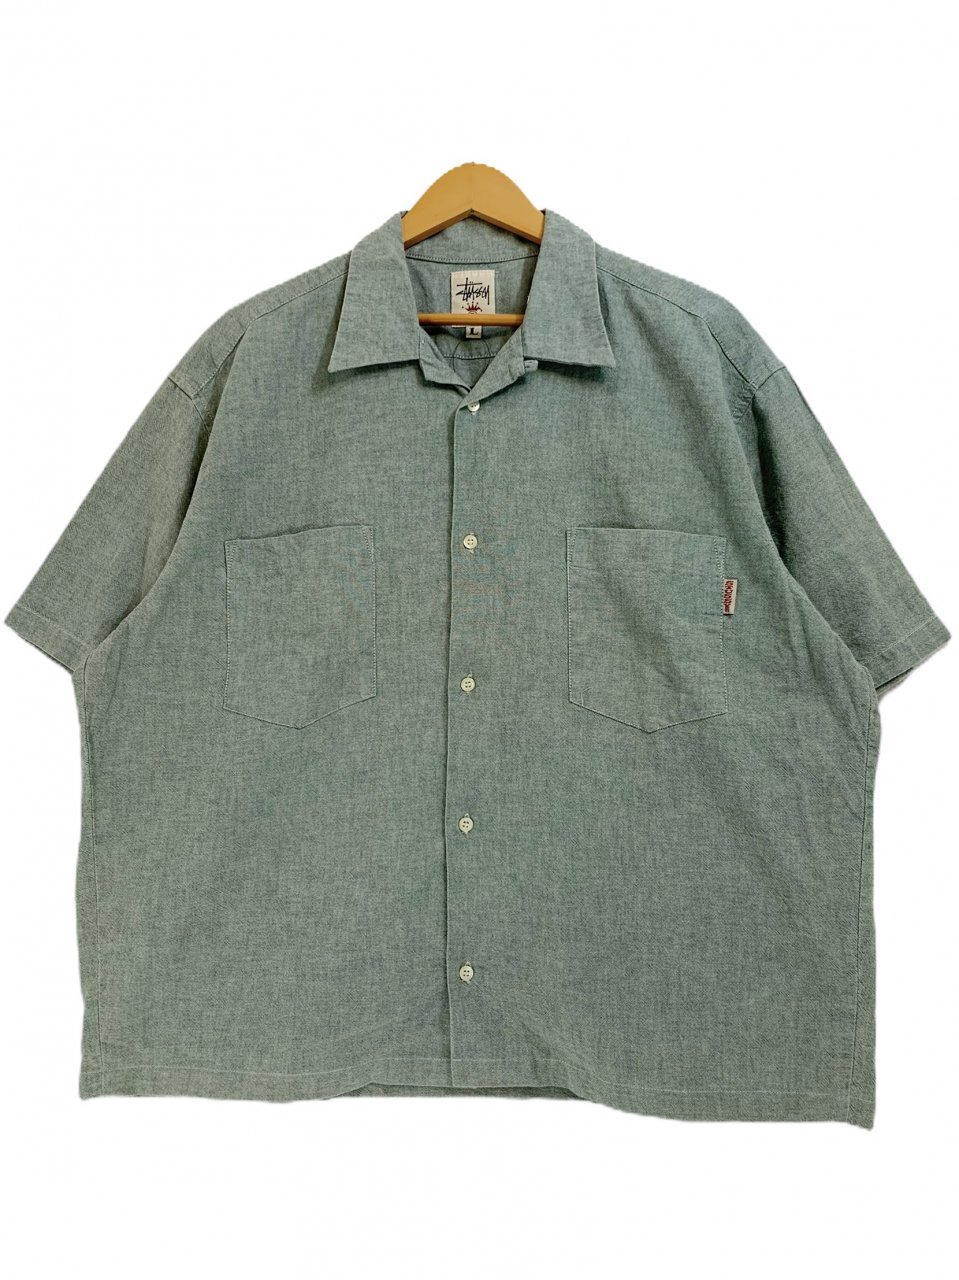 USA製 90s OLD STUSSY Cotton Open Collar S/S Shirt 緑 L 白タグ 